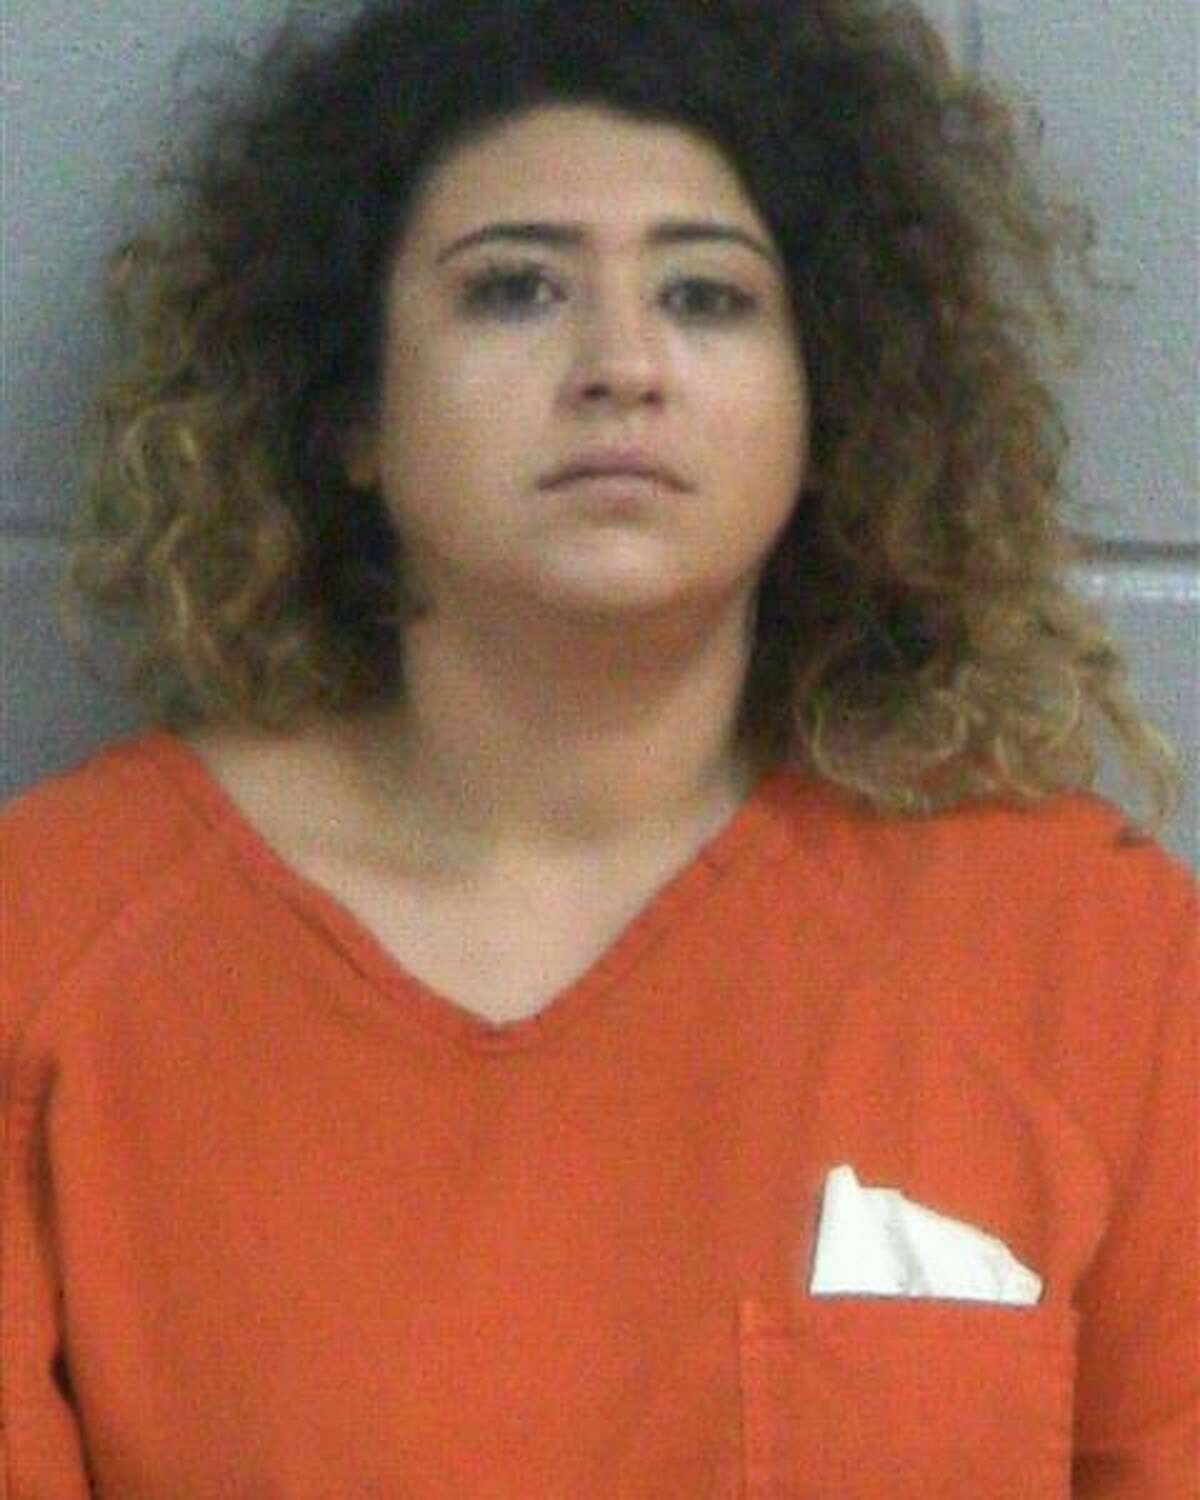 Bianca Marie Machuca of Odessa was charged with two counts of intoxication assault with a vehicle causing serious bodily injury, third-degree felony charges. 